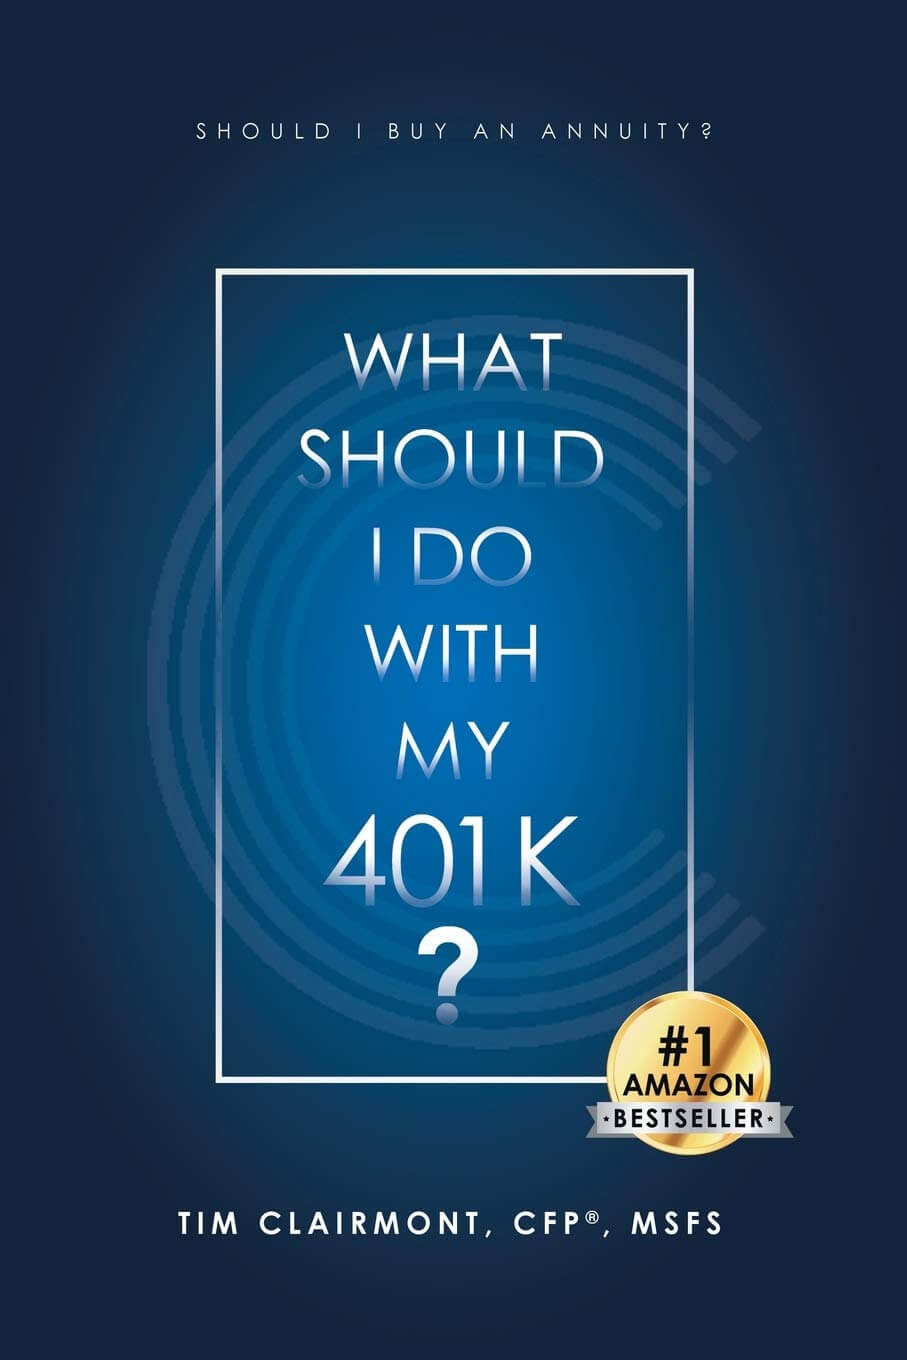 What Should I Do with My 401k?: Should I Buy an Annuity? By Tim Clairmont